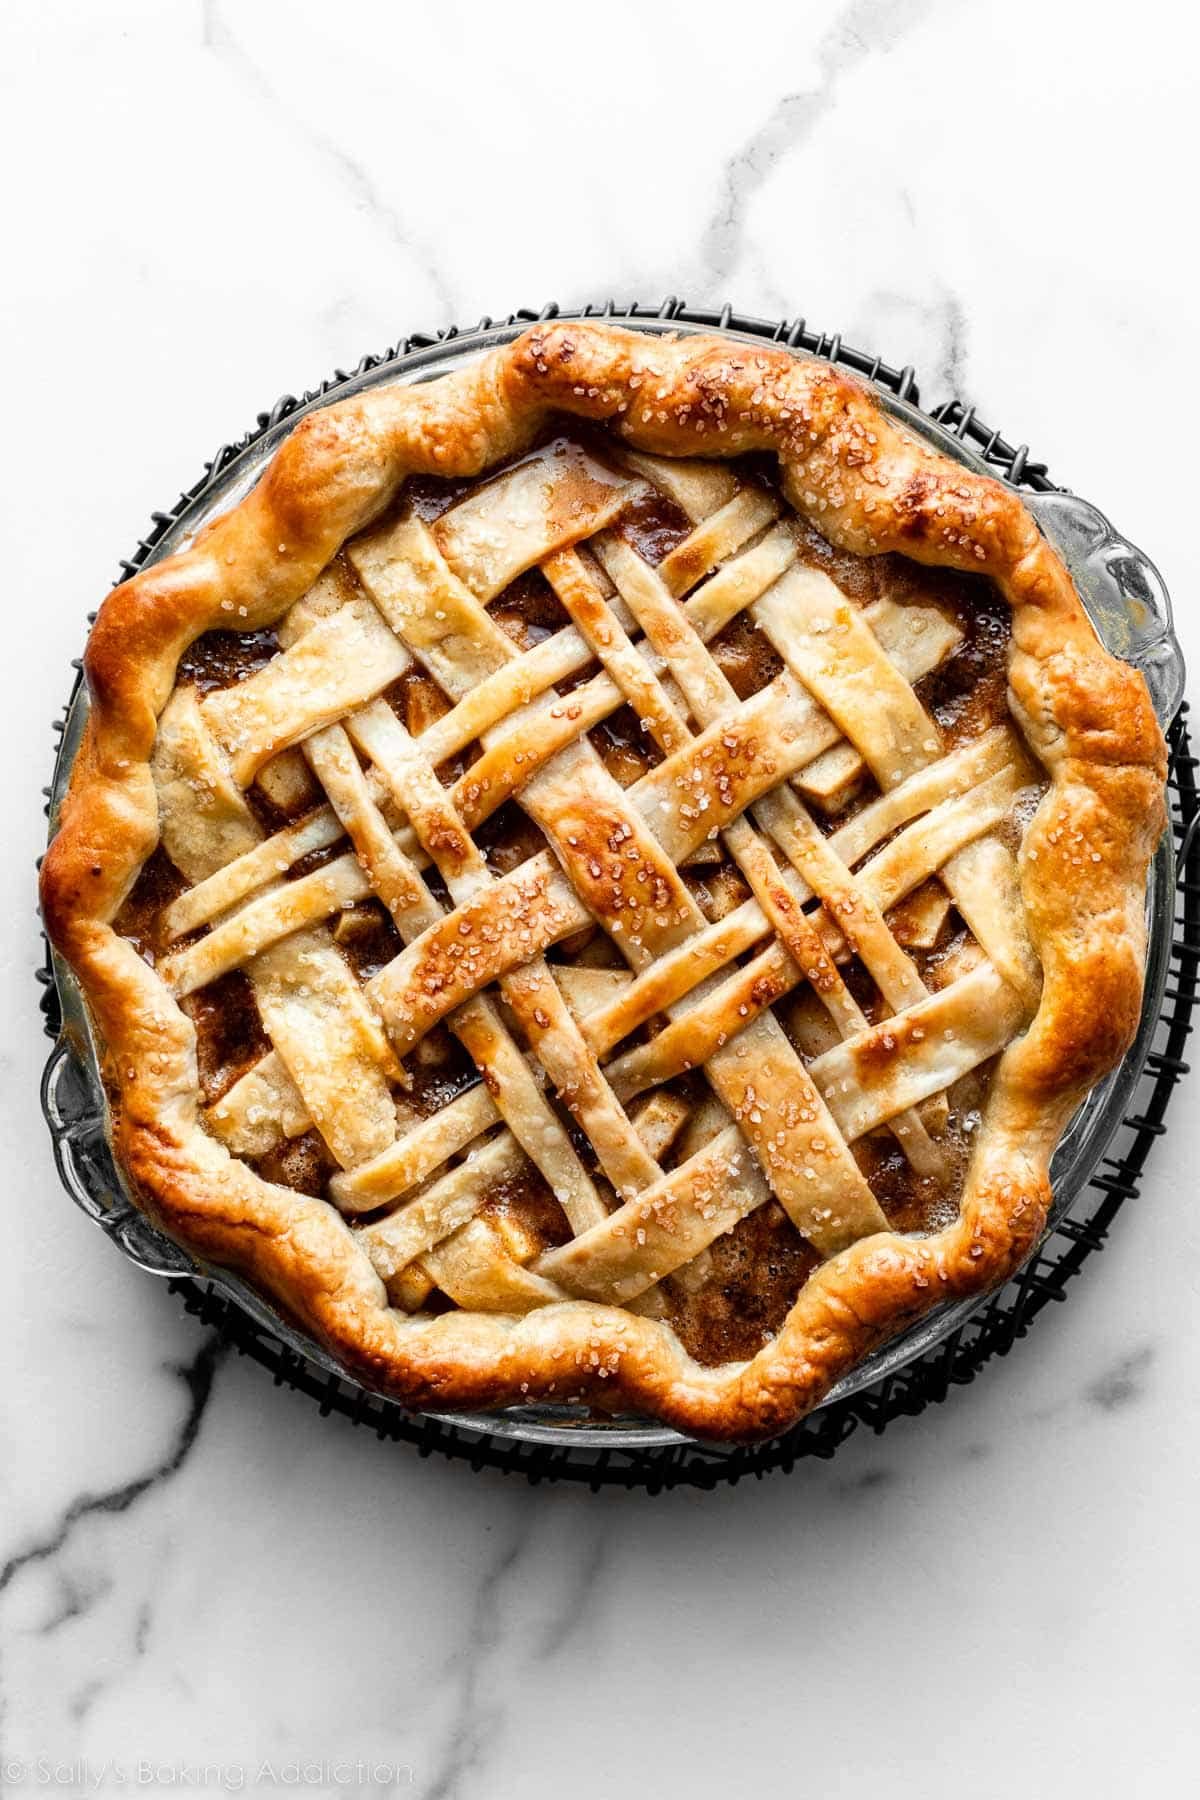 baked pie with thick and thin lattice pie crust topping.